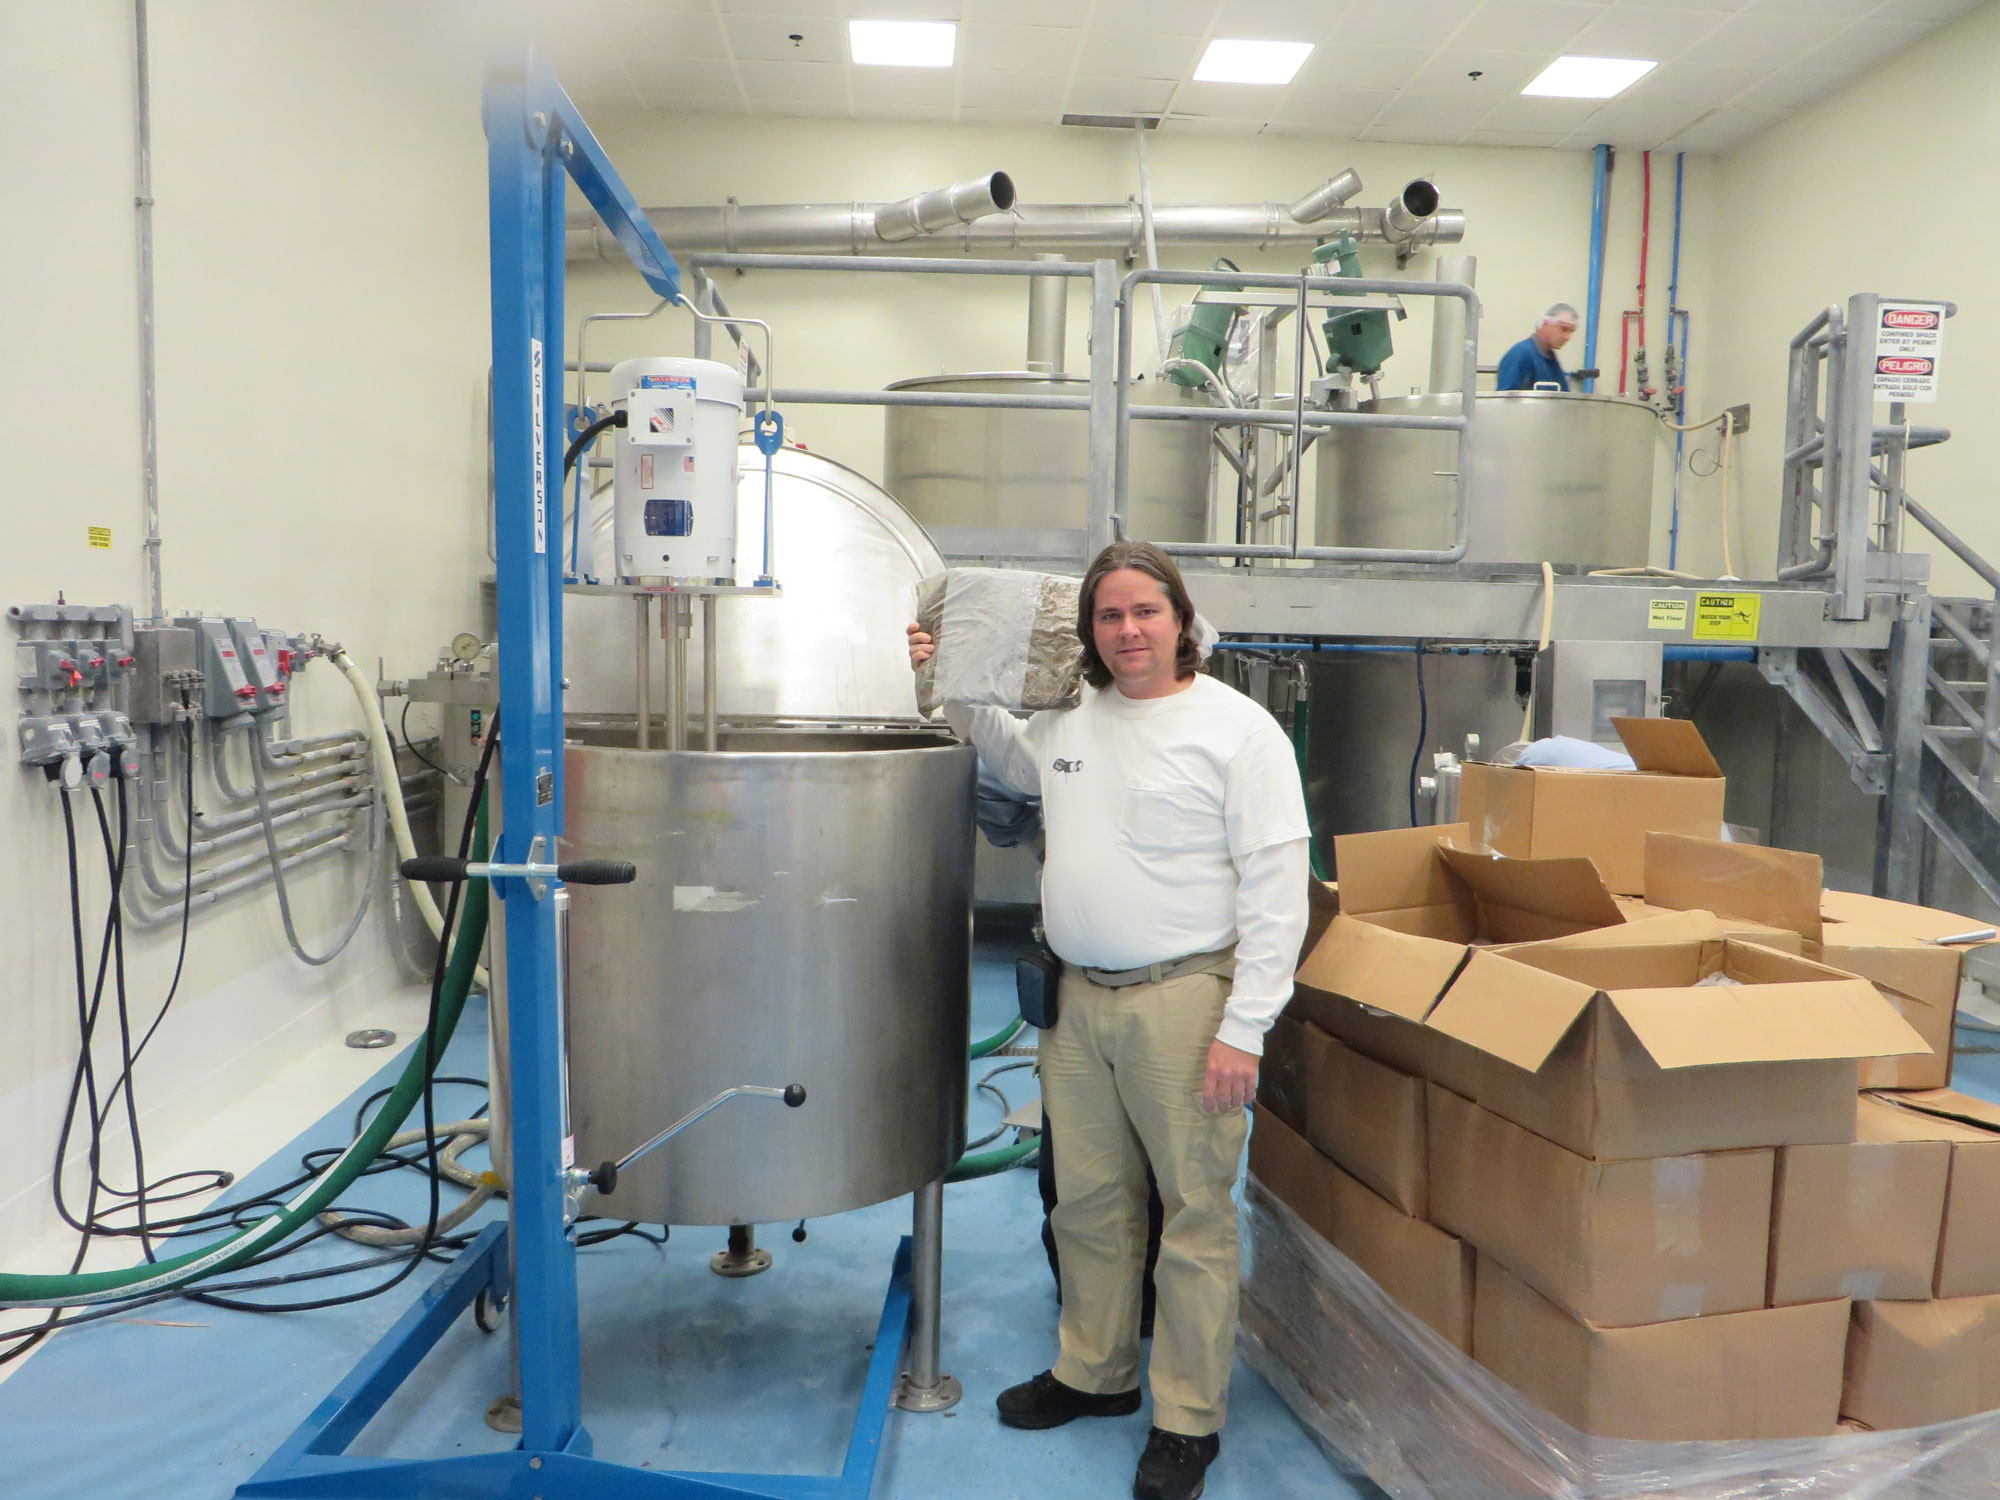 Dr. Aaron Dossey holding the product beside a vat in a facility